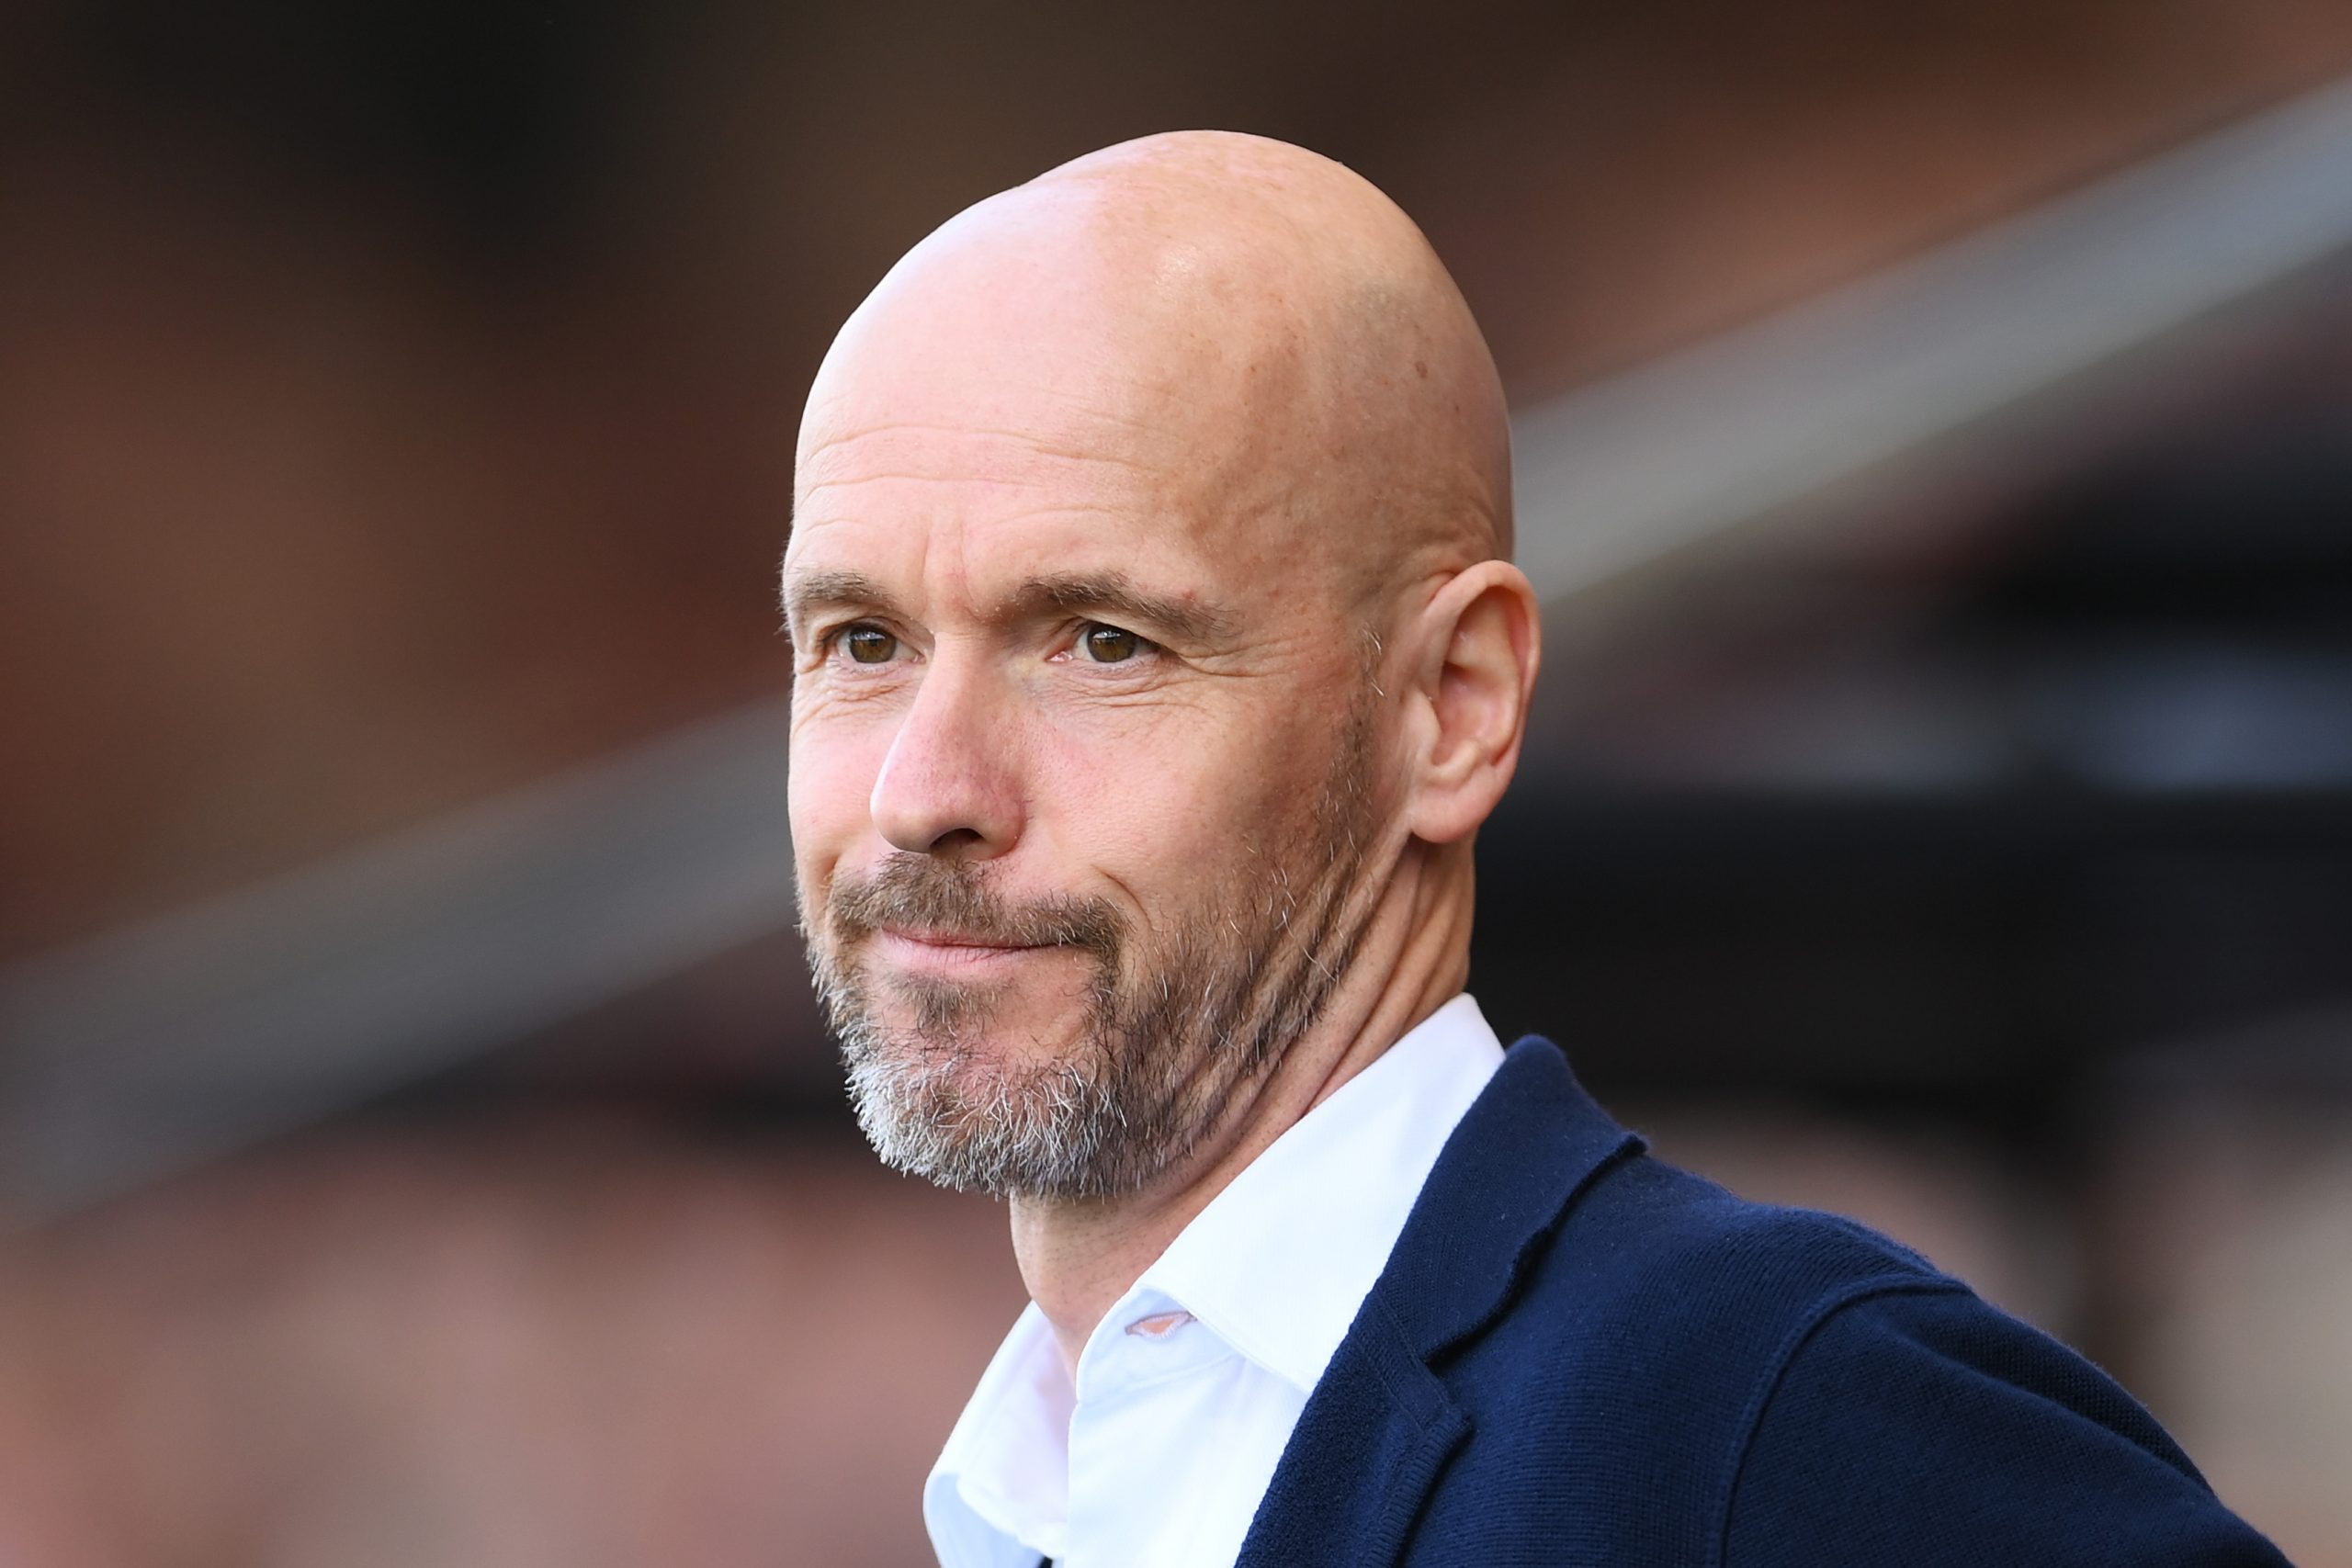 Manchester United are planning on opening contract talks with Erik ten Hag.